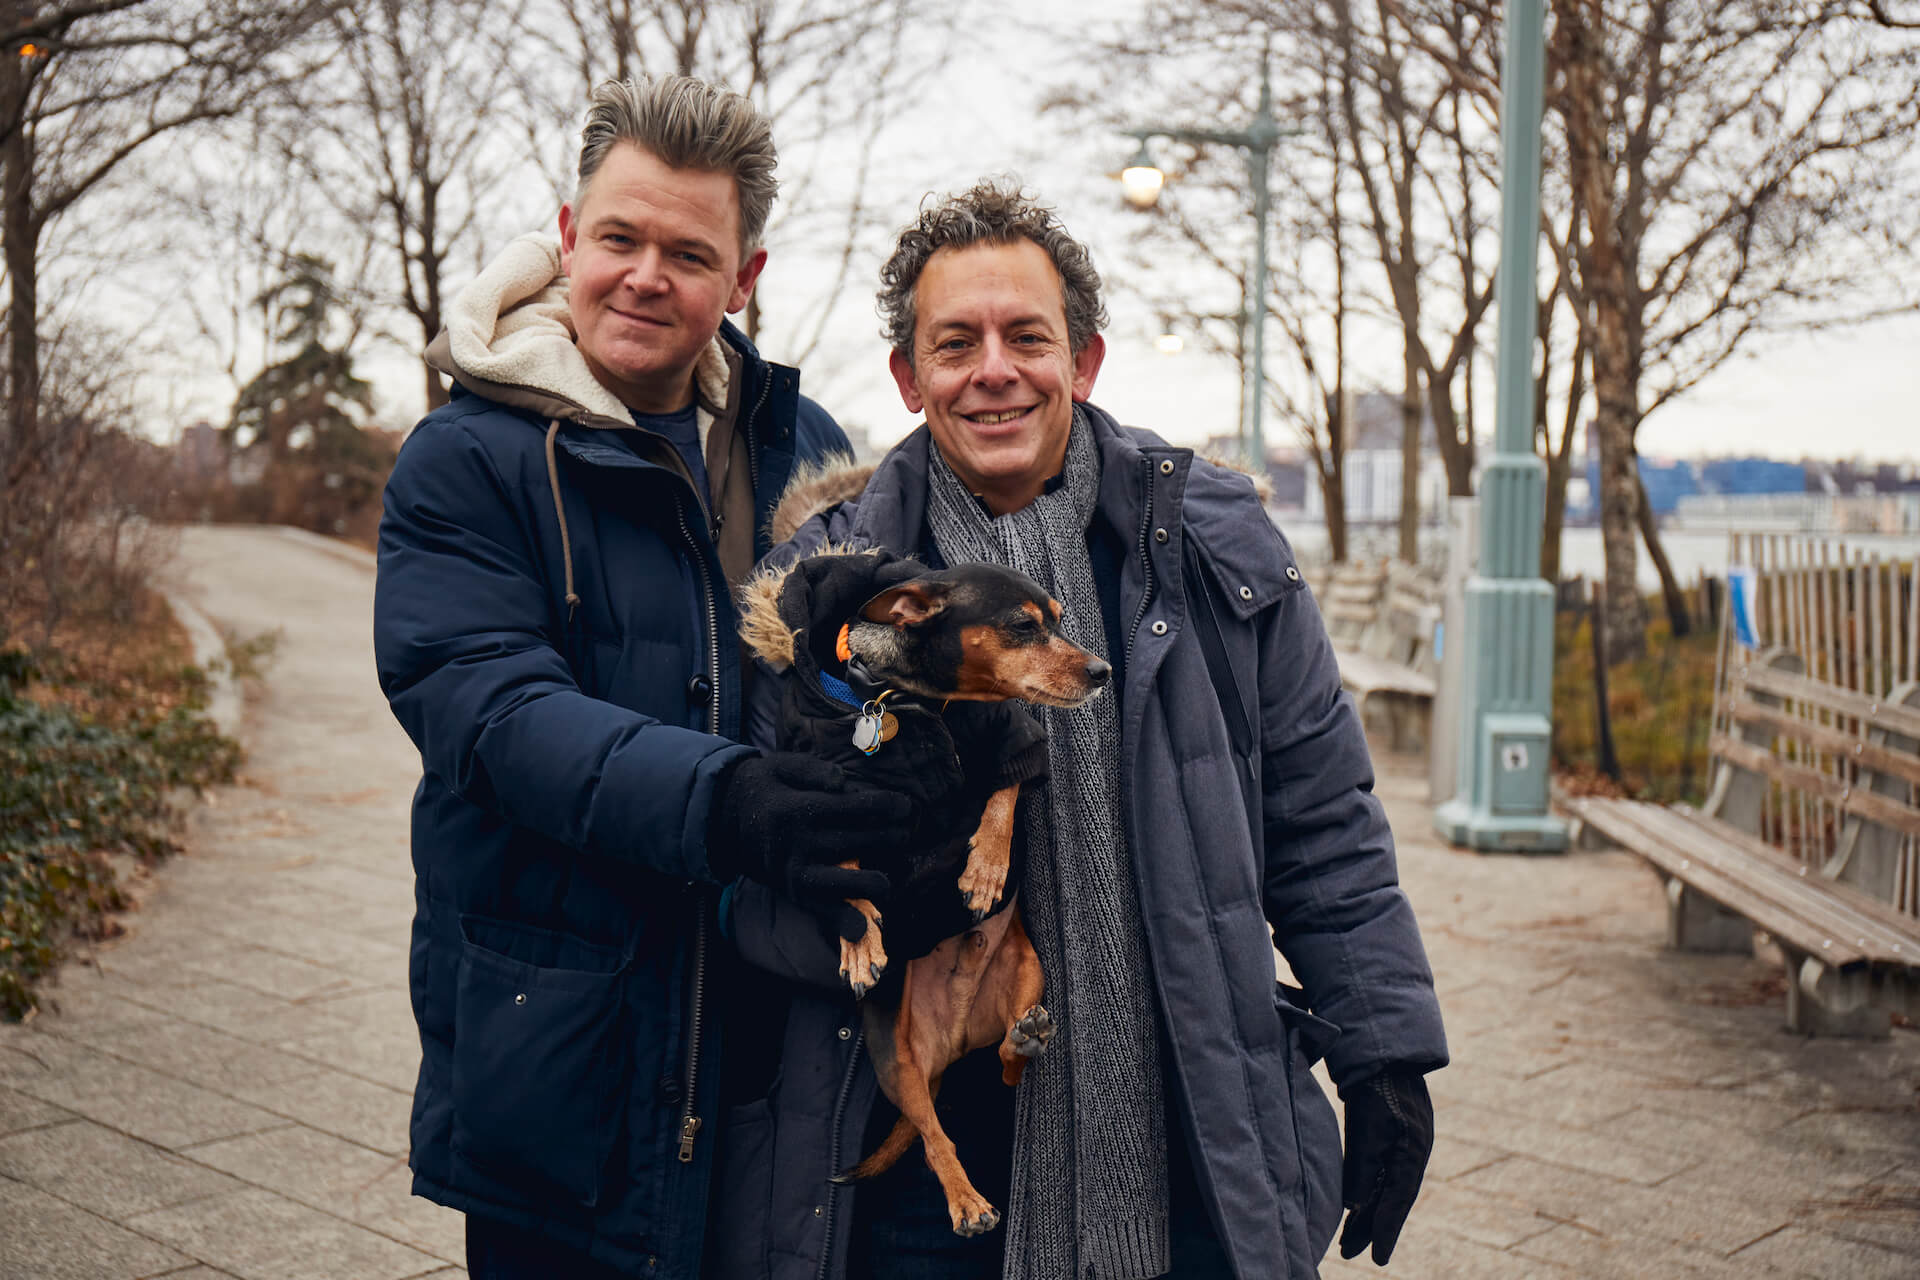 Tony and his partner with their dog in the park